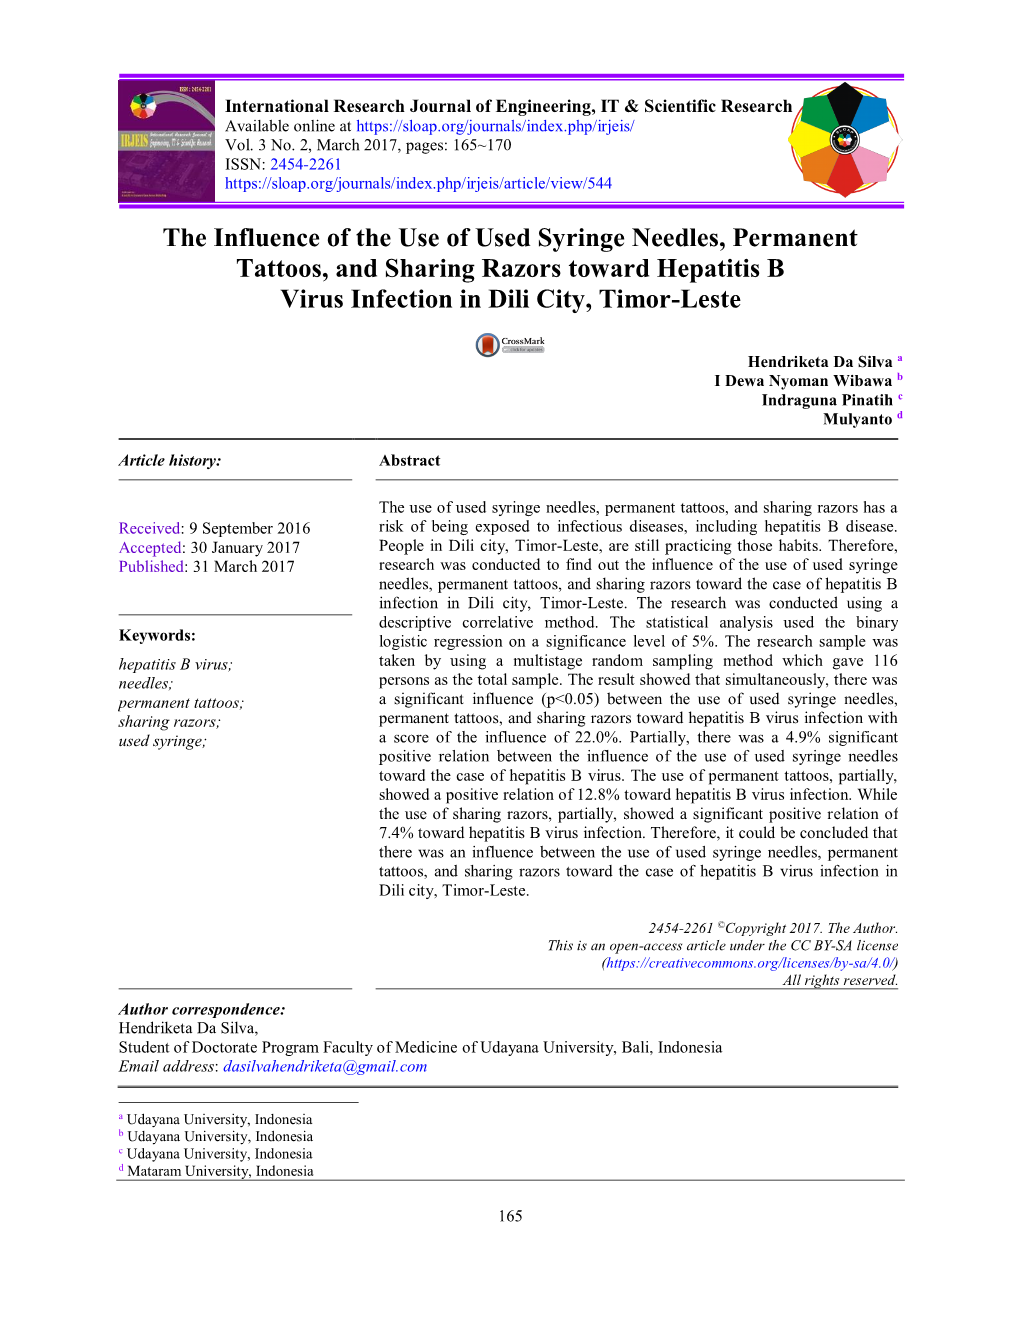 The Influence of the Use of Used Syringe Needles, Permanent Tattoos, and Sharing Razors Toward Hepatitis B Virus Infection in Dili City, Timor-Leste